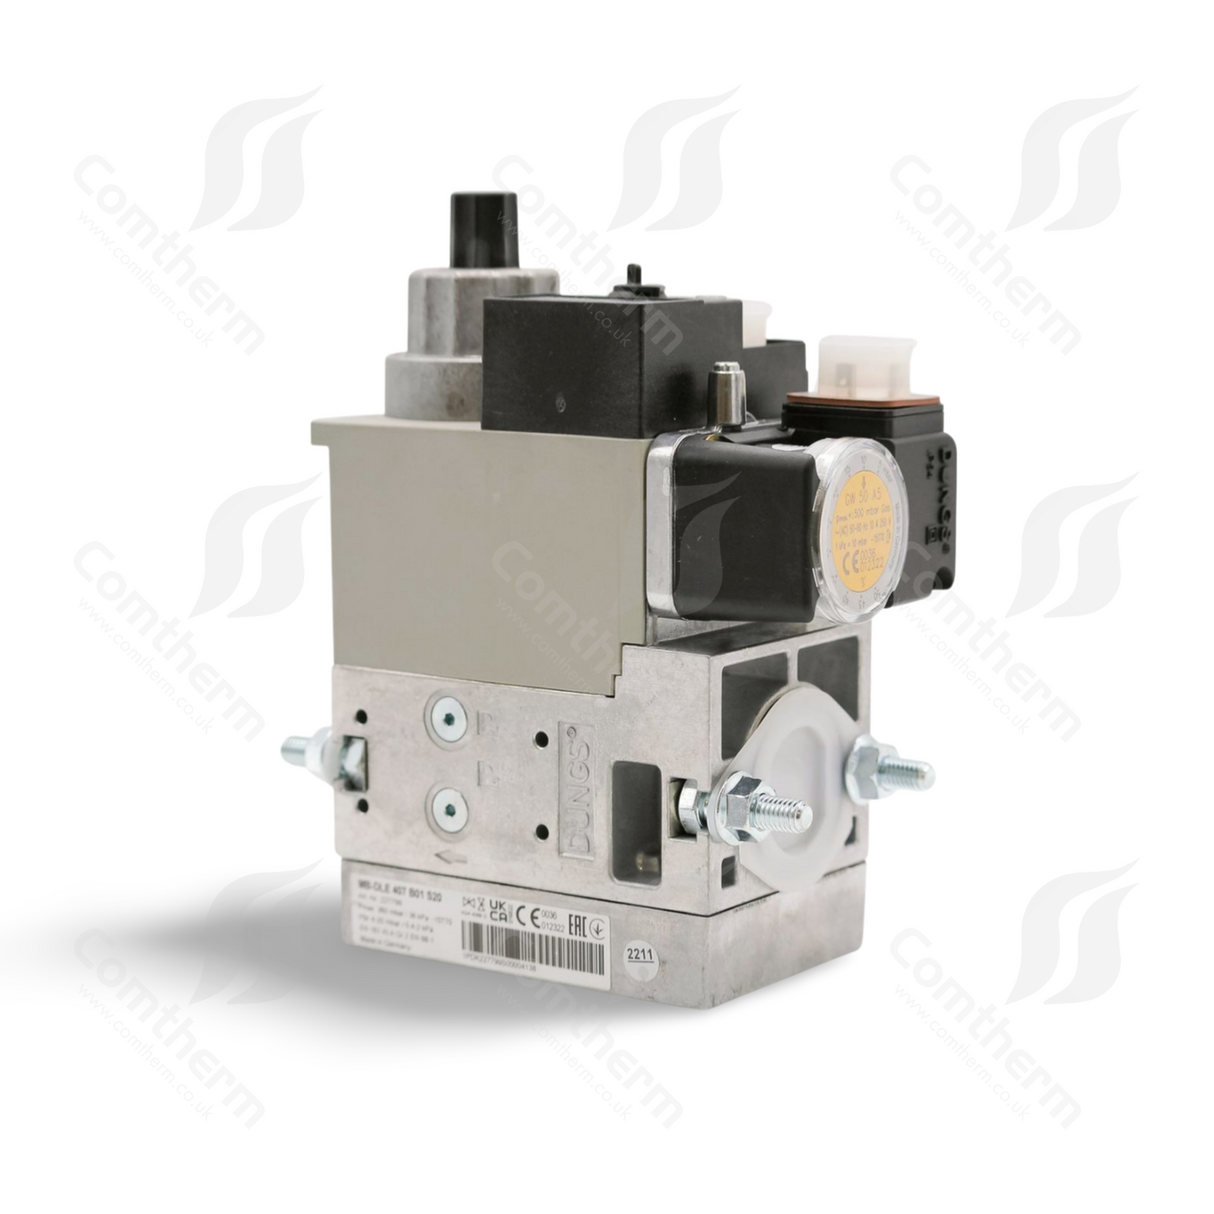 Dungs MB-DLE 407 B01 S50 + GW150A5 Multiblock-Gasventil – 110 V 